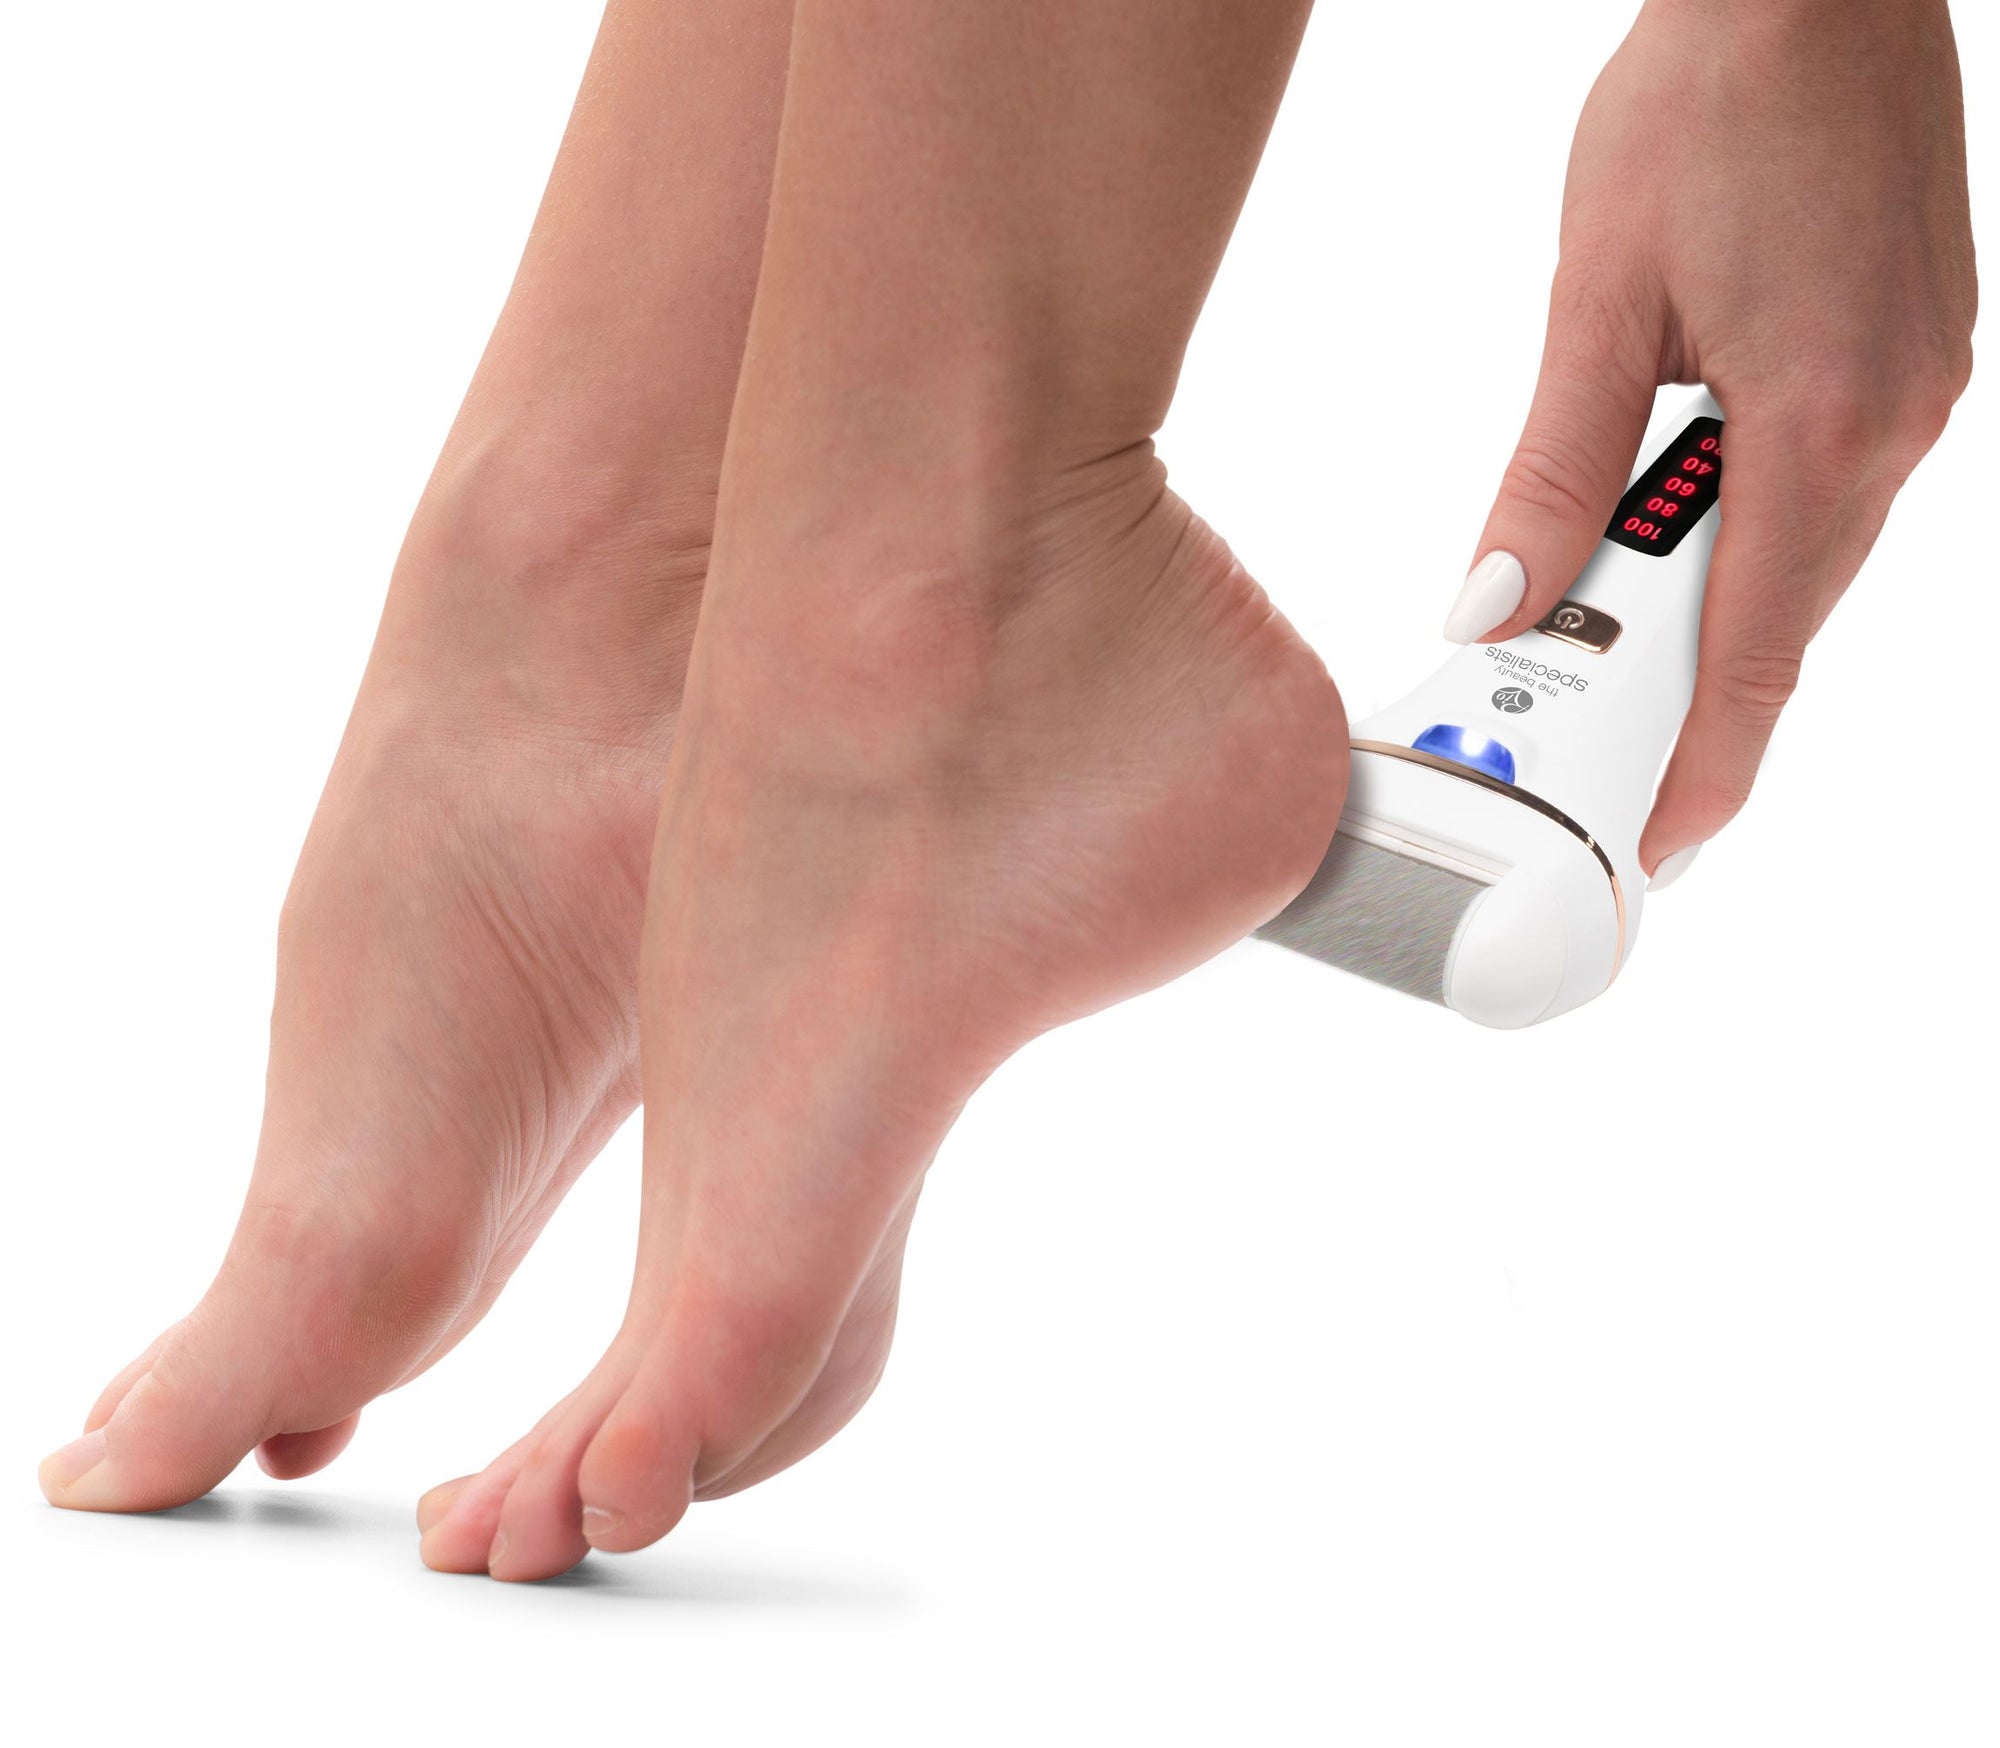 Electric hard skin remover being used on foot